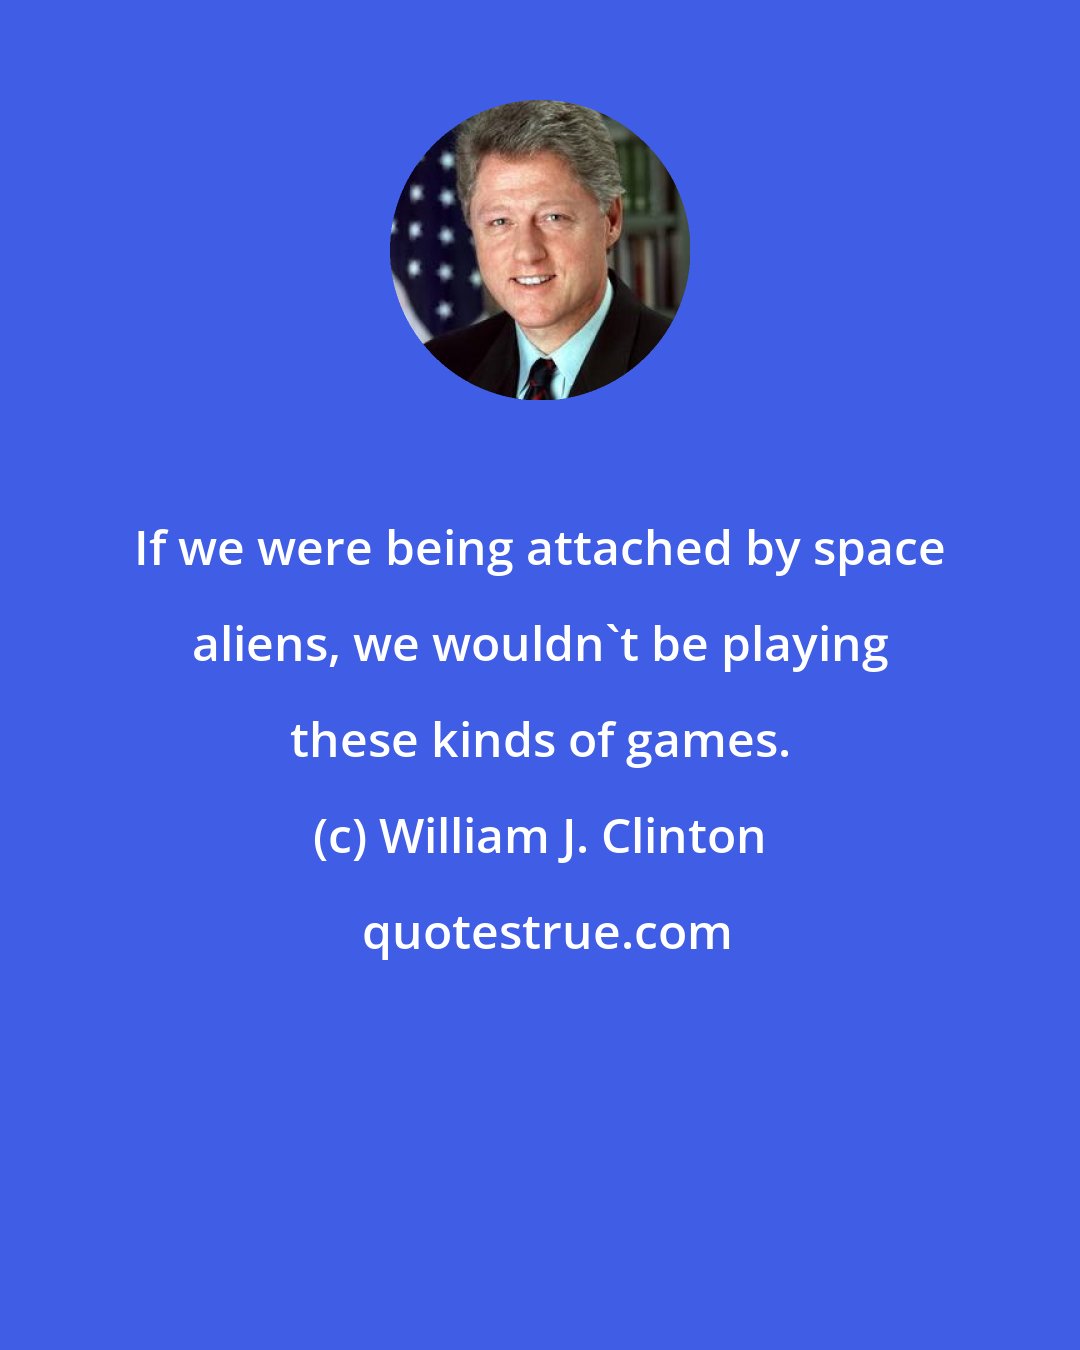 William J. Clinton: If we were being attached by space aliens, we wouldn't be playing these kinds of games.